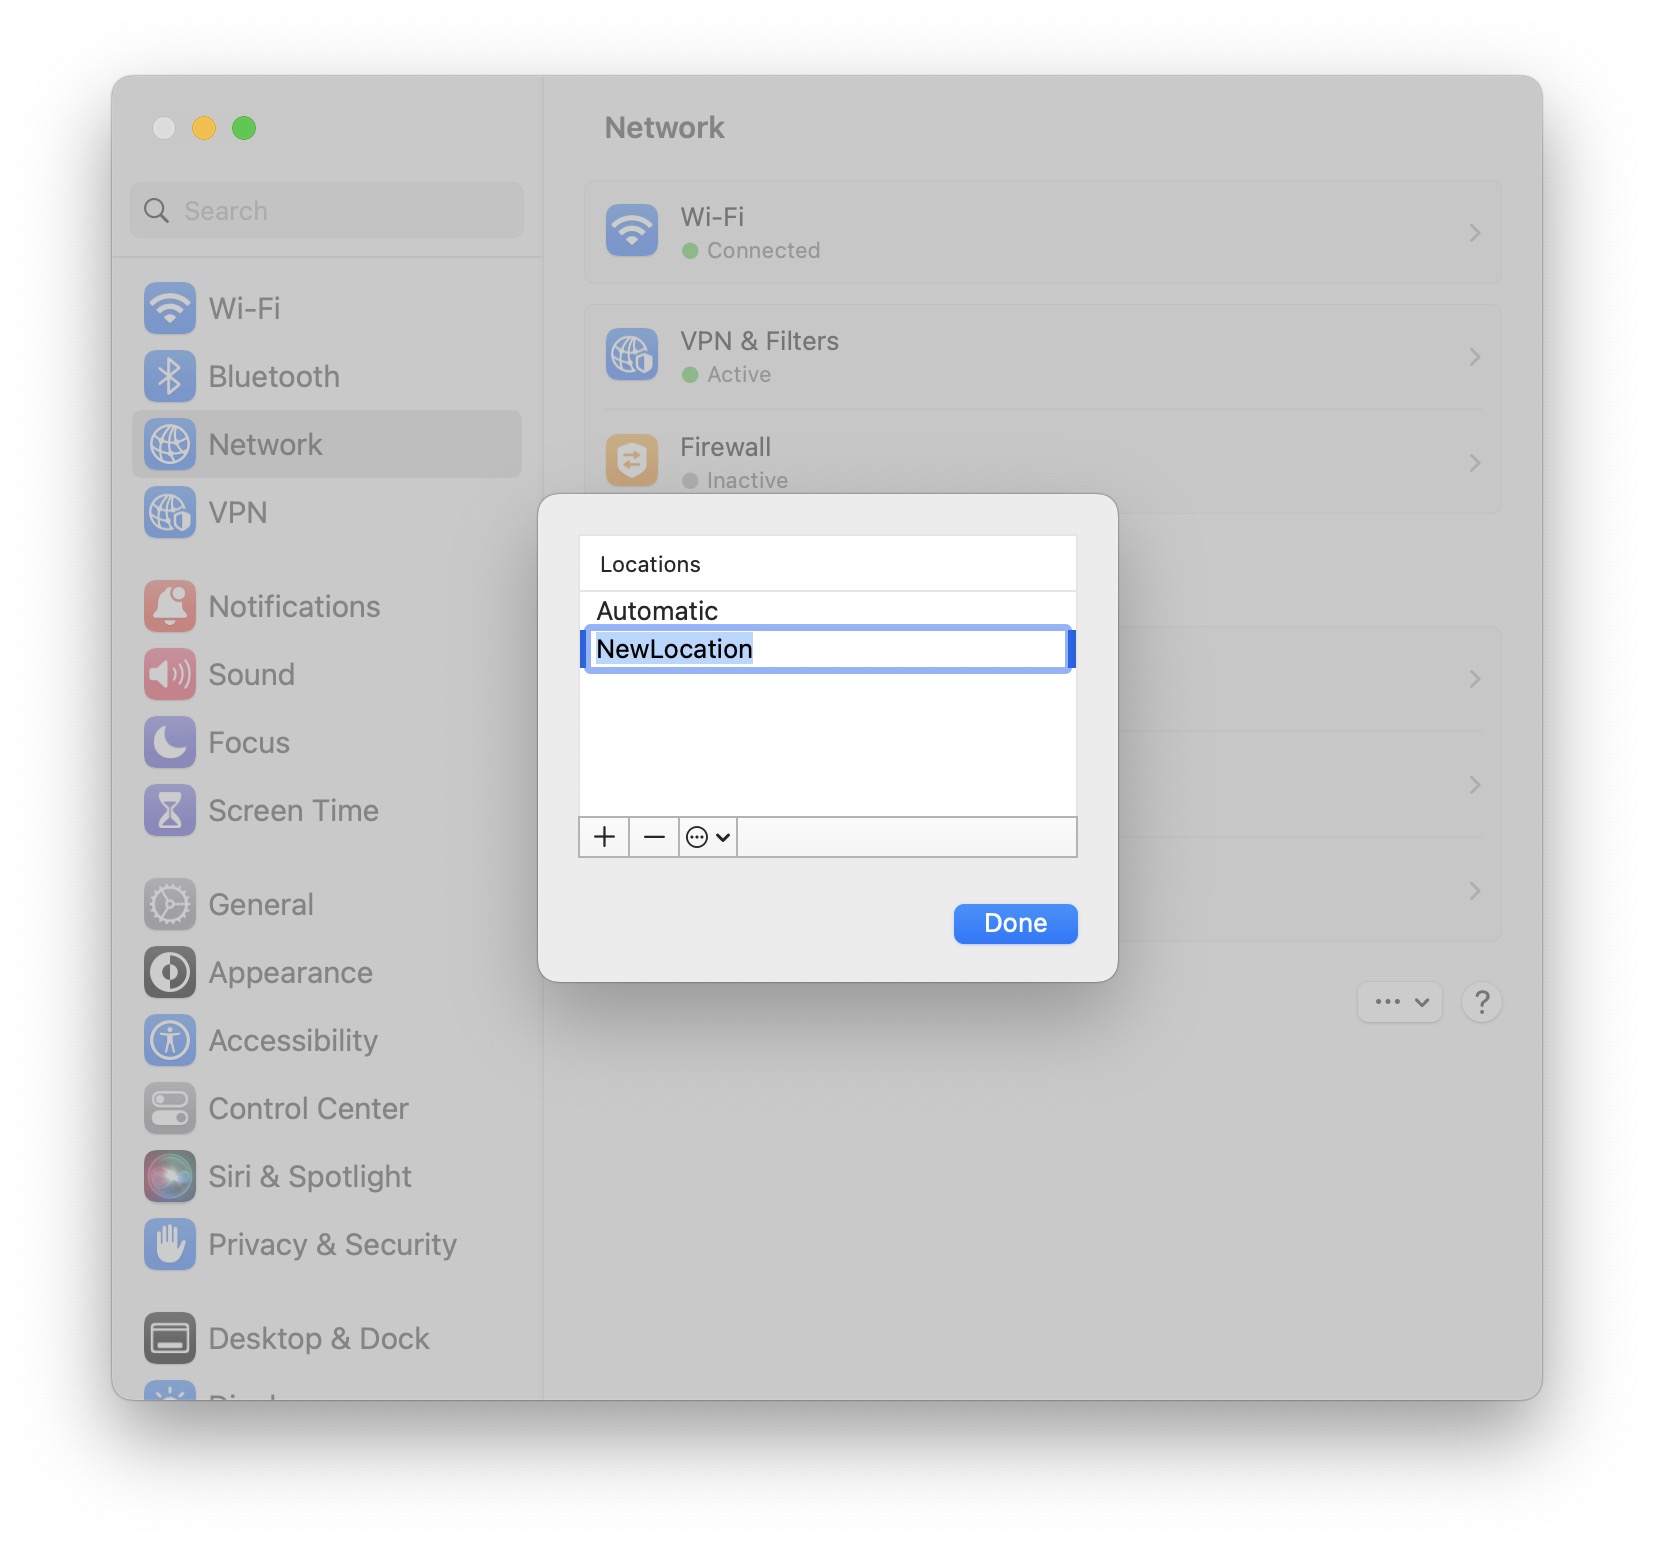 How to Use Network Locations in MacOS Ventura